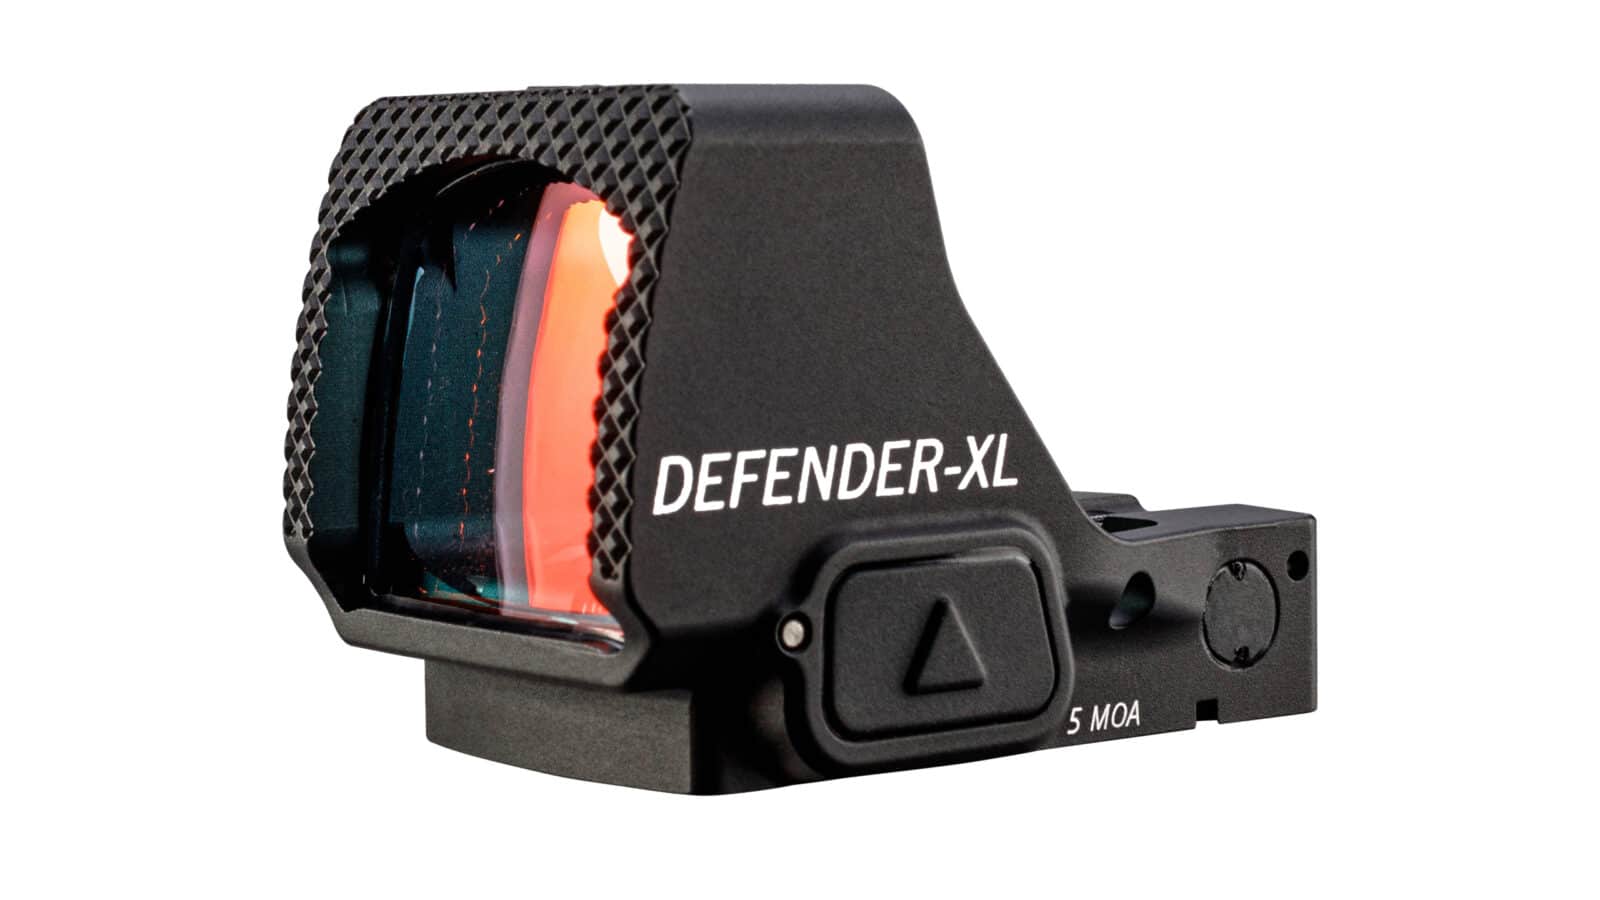 The Vortex Defender XL is an excellent example of the reflex sights optics available today. It has a large lens for a generous field of view.